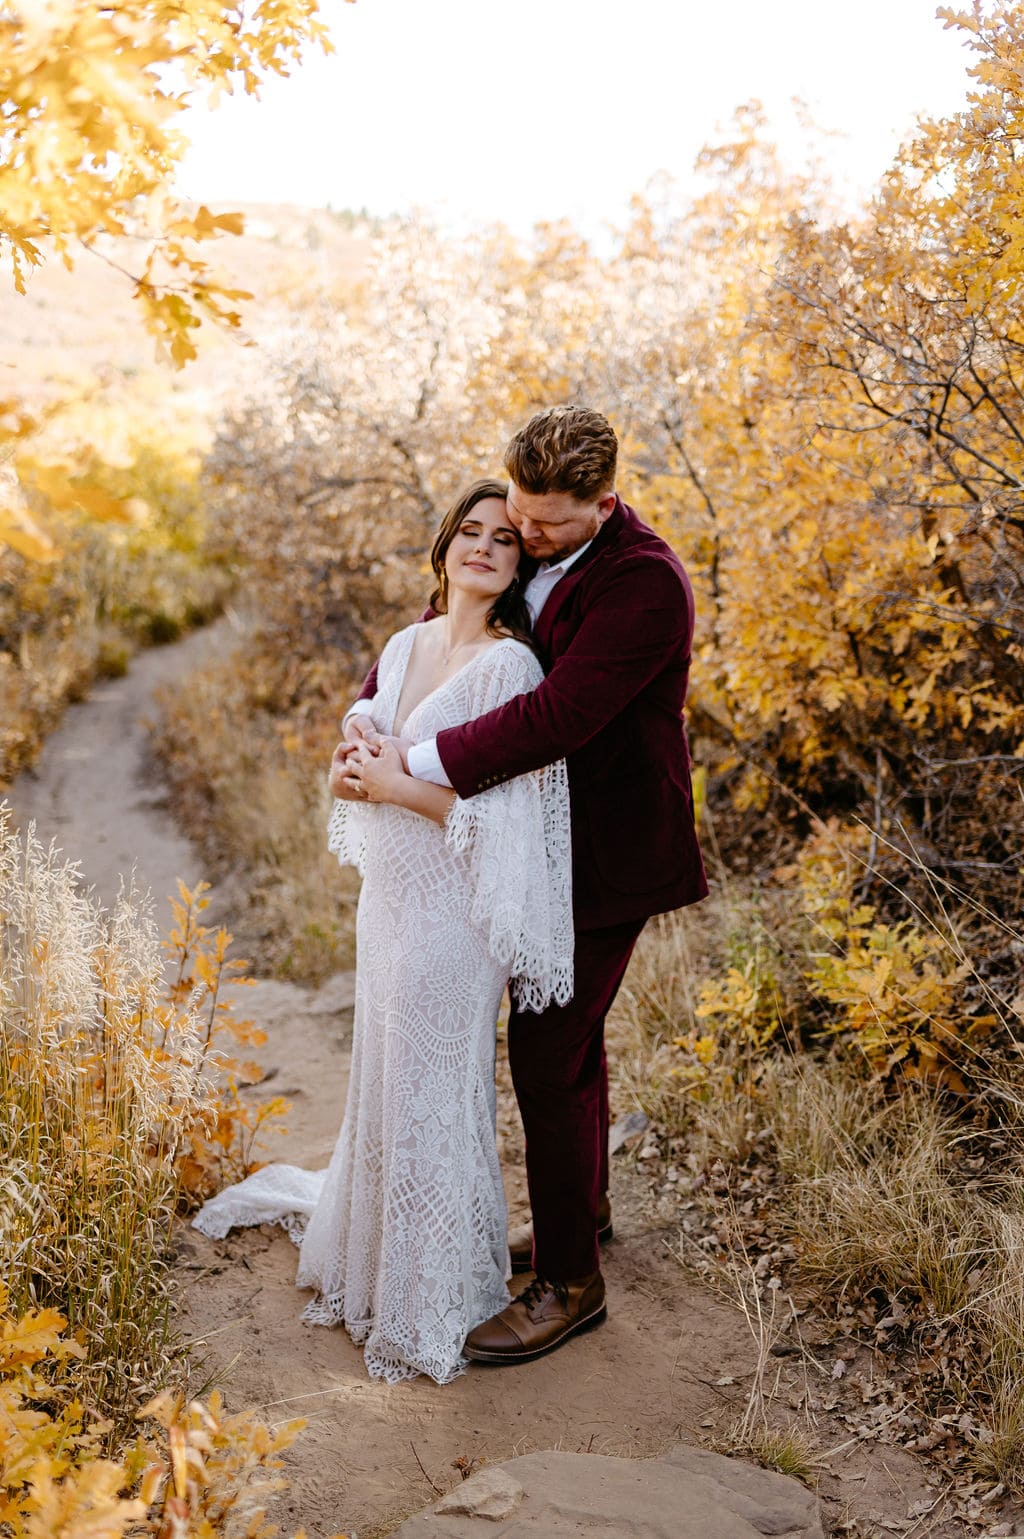 Wedding Couple Surrounded by fall colors at their colorado elopement at Roxborough State Park in October